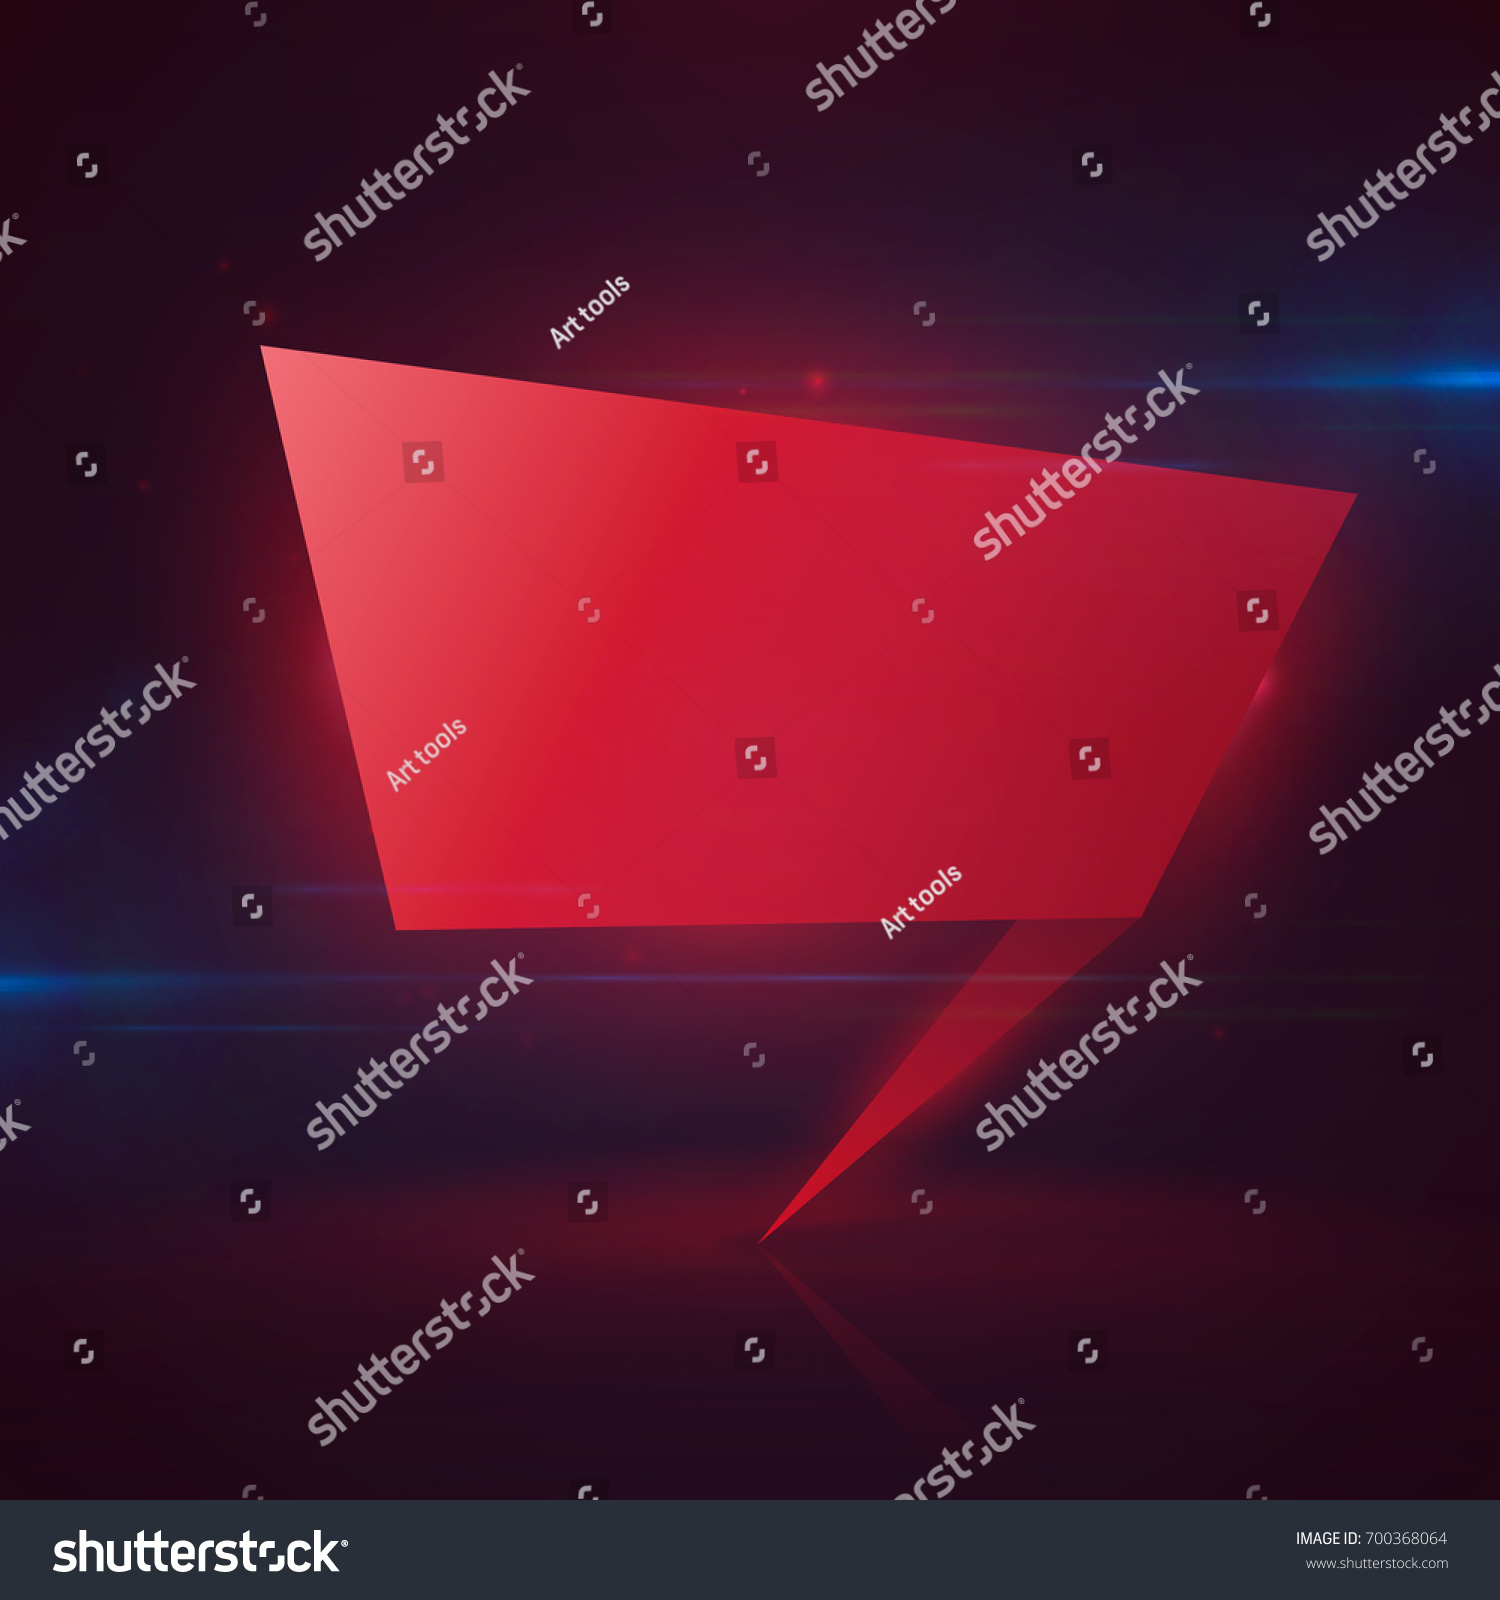 Realistic Empty 3d Banner Template Neon Stock Vector Royalty Free 700368064